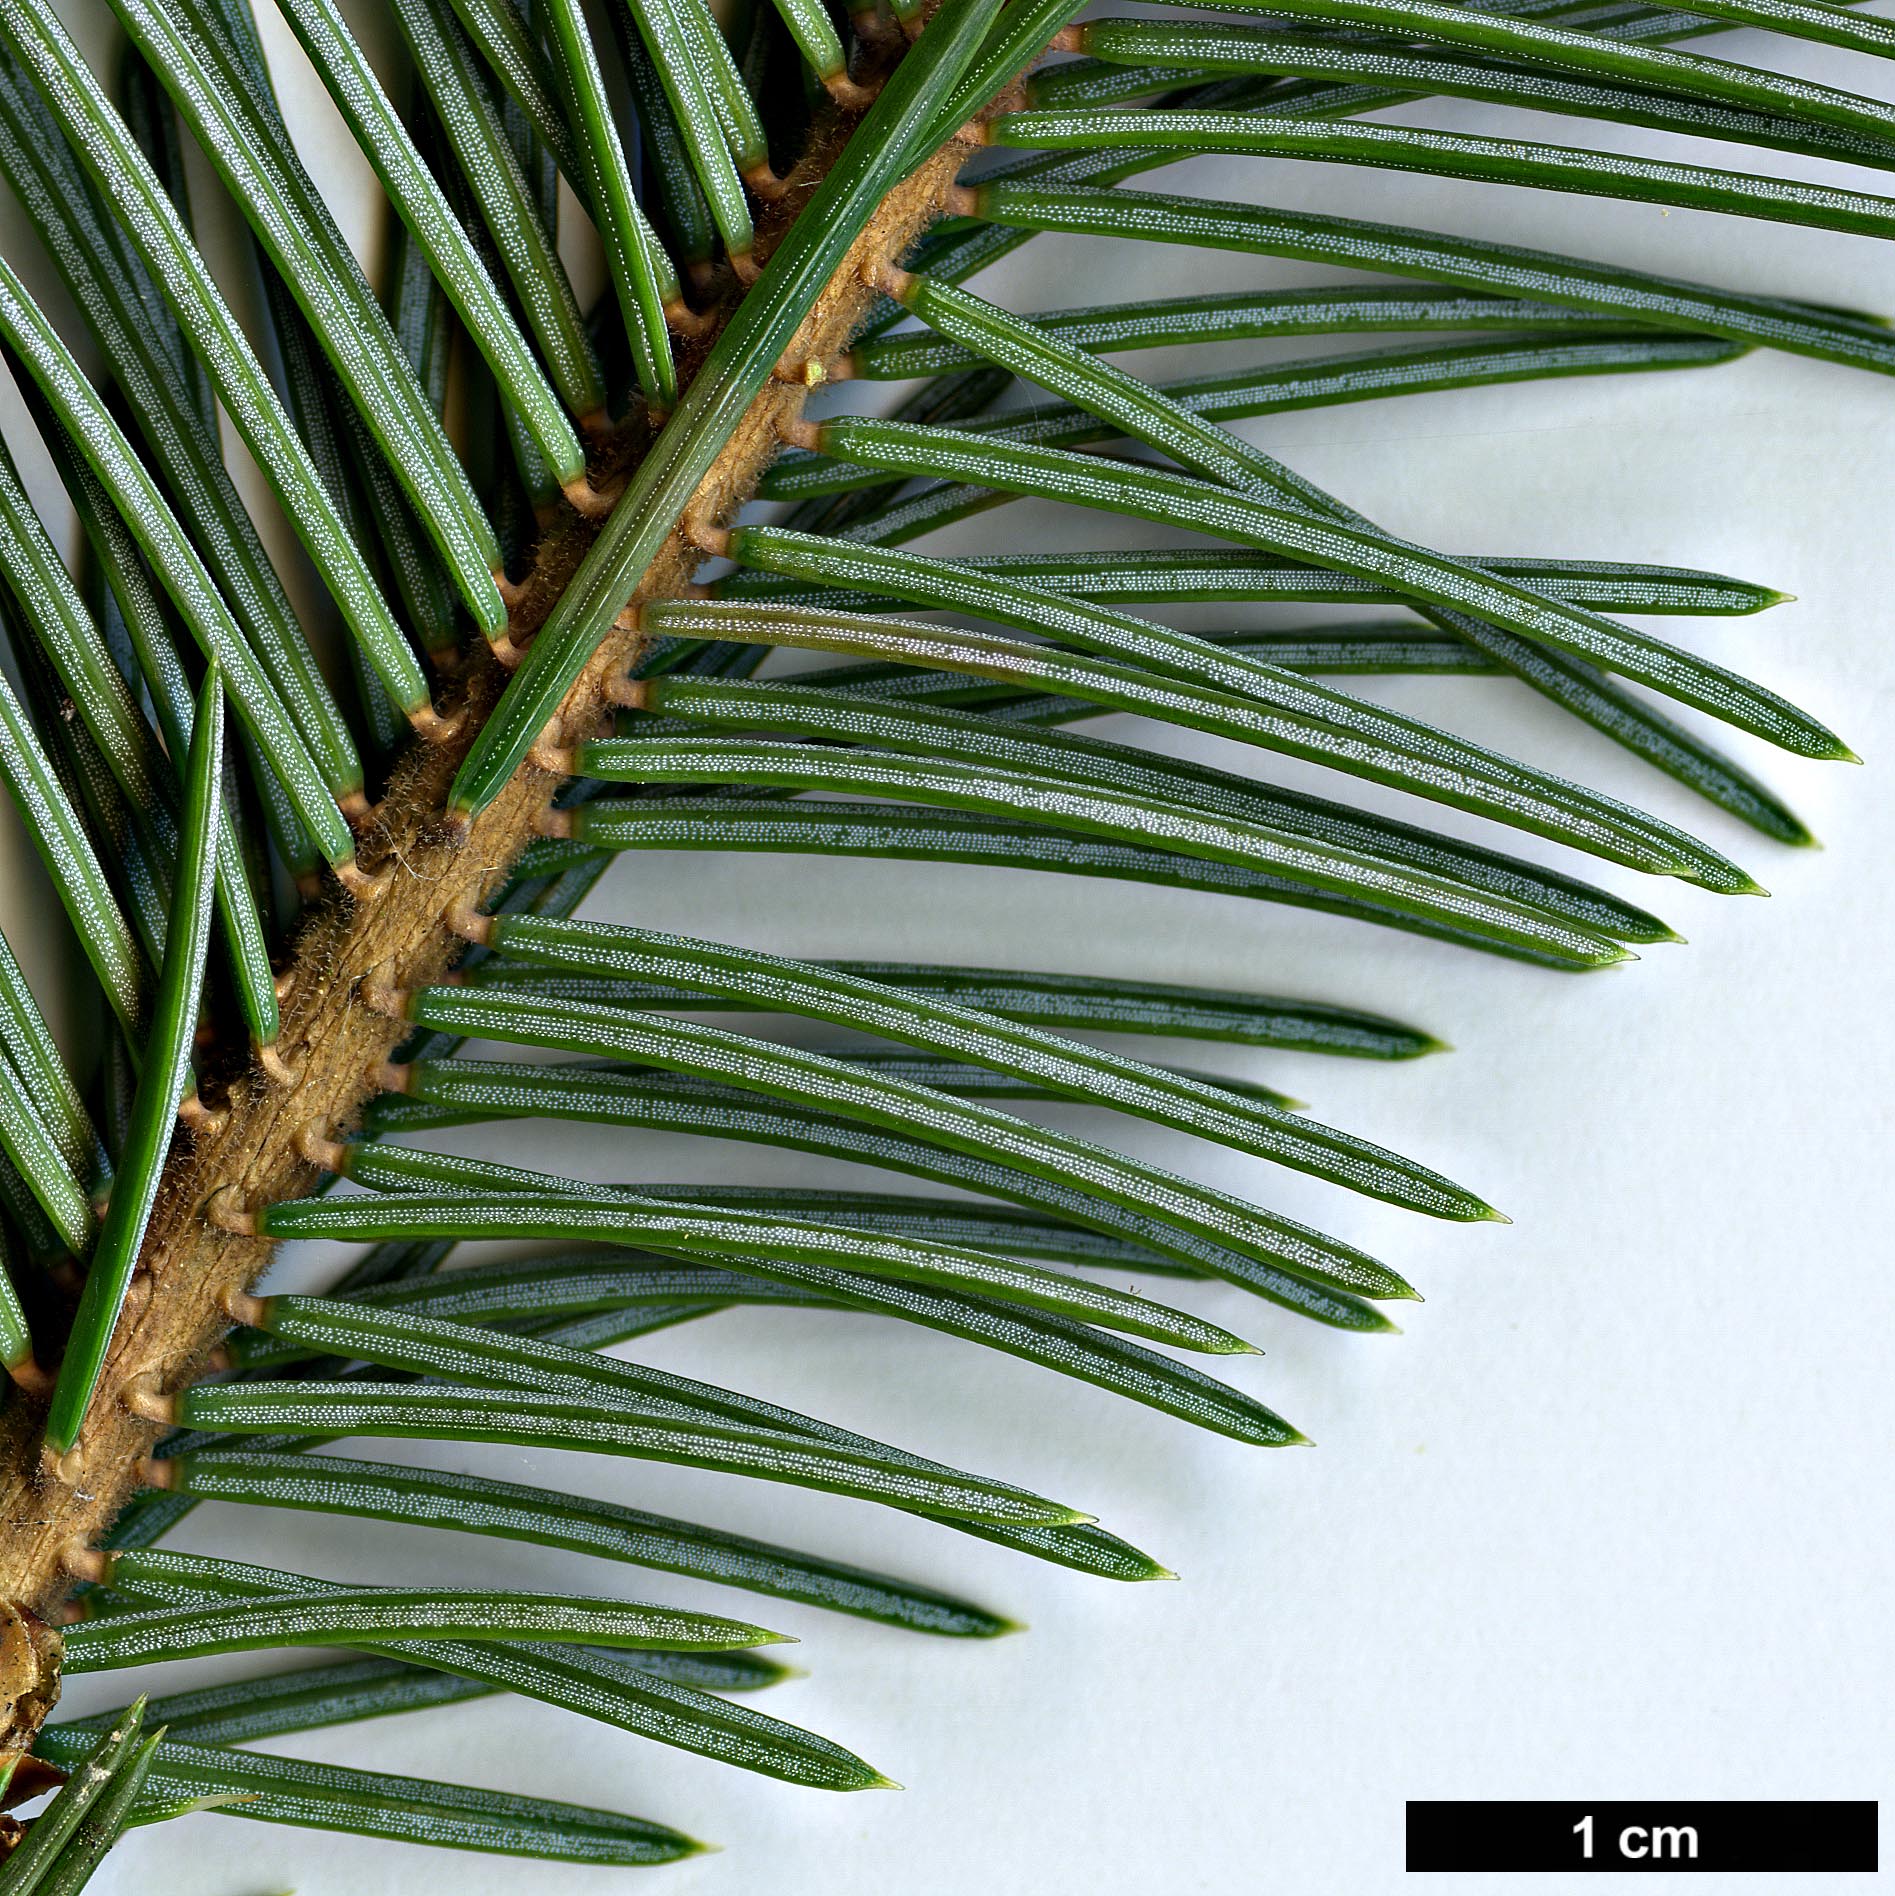 High resolution image: Family: Pinaceae - Genus: Picea - Taxon: likiangensis